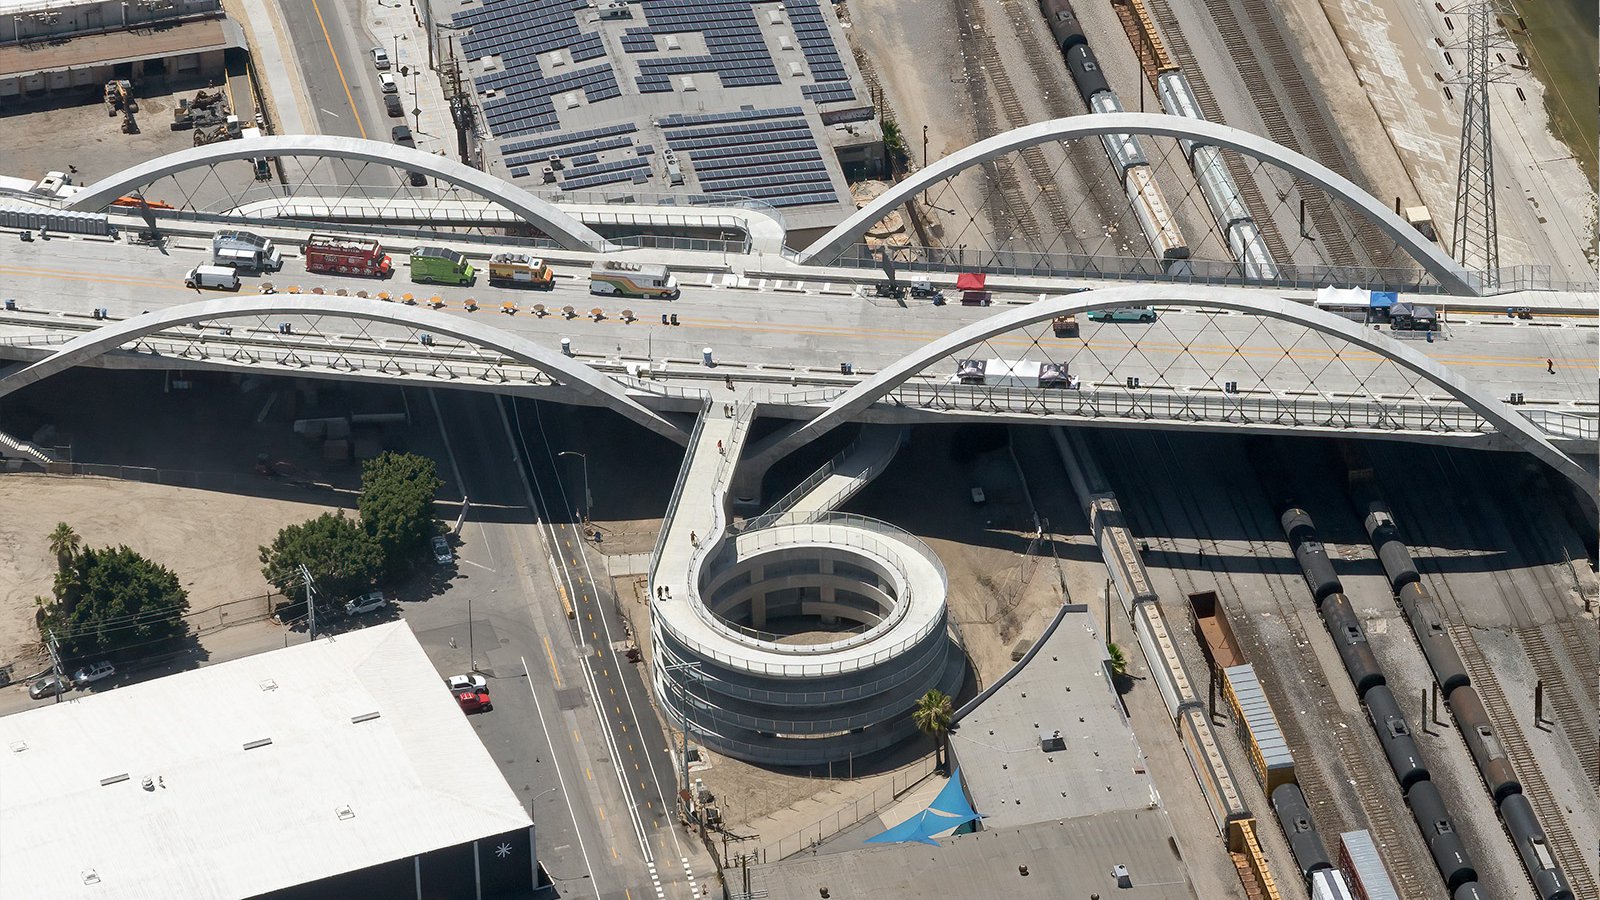 Aerial blog image of the circular ramp to access the Sixth Street Bridge during its opening weekend in Downtown Los Angeles, California